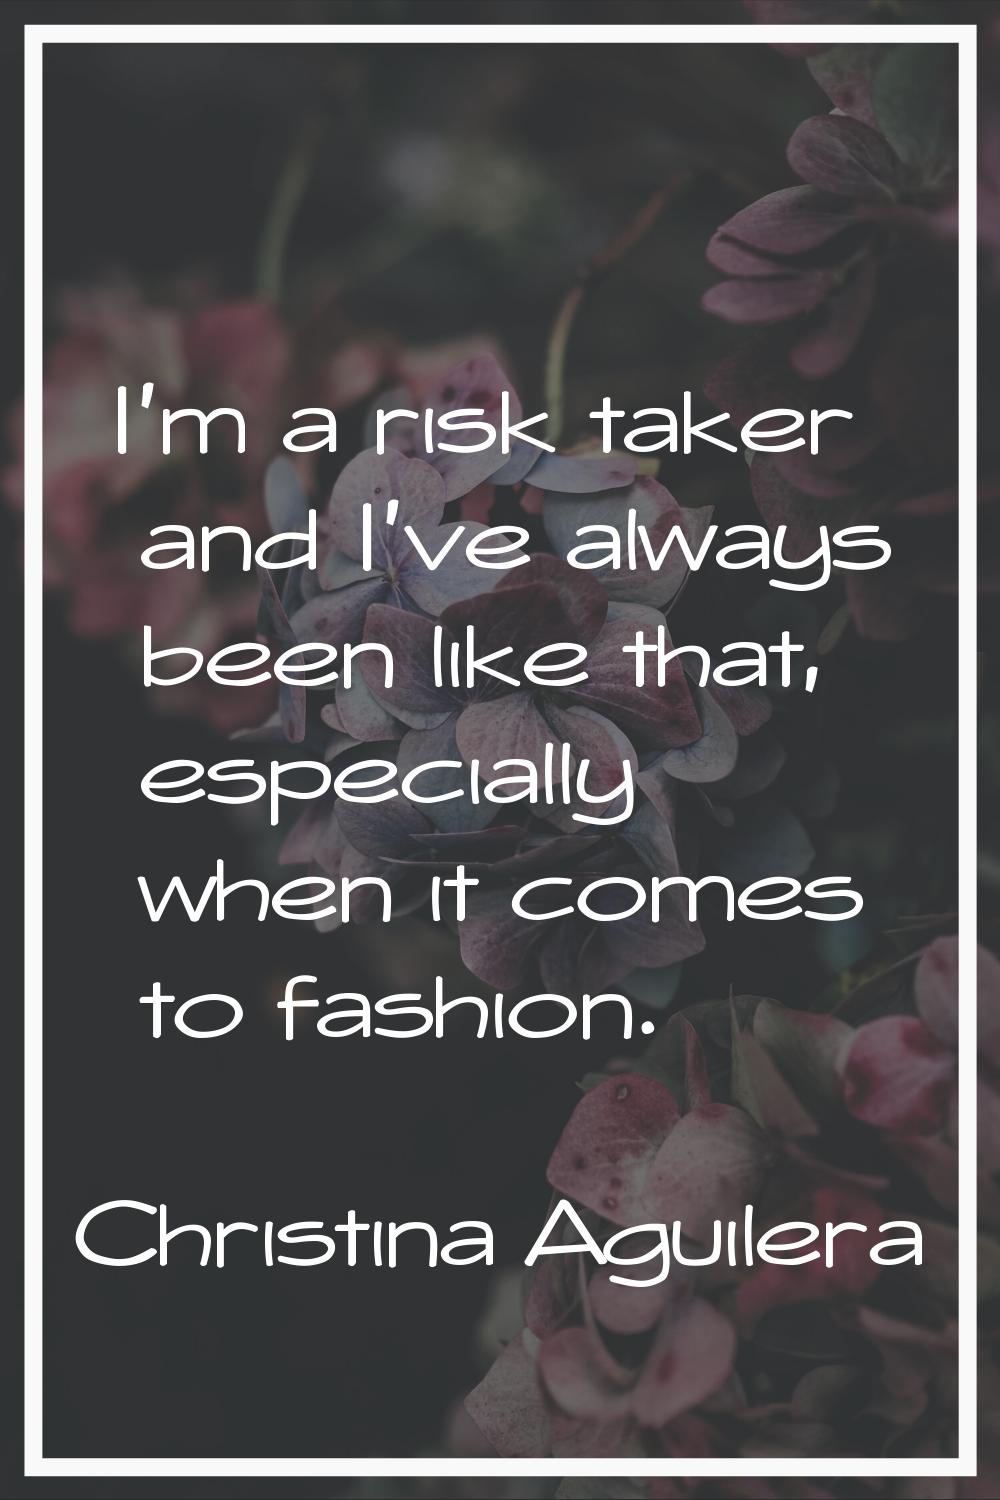 I'm a risk taker and I've always been like that, especially when it comes to fashion.